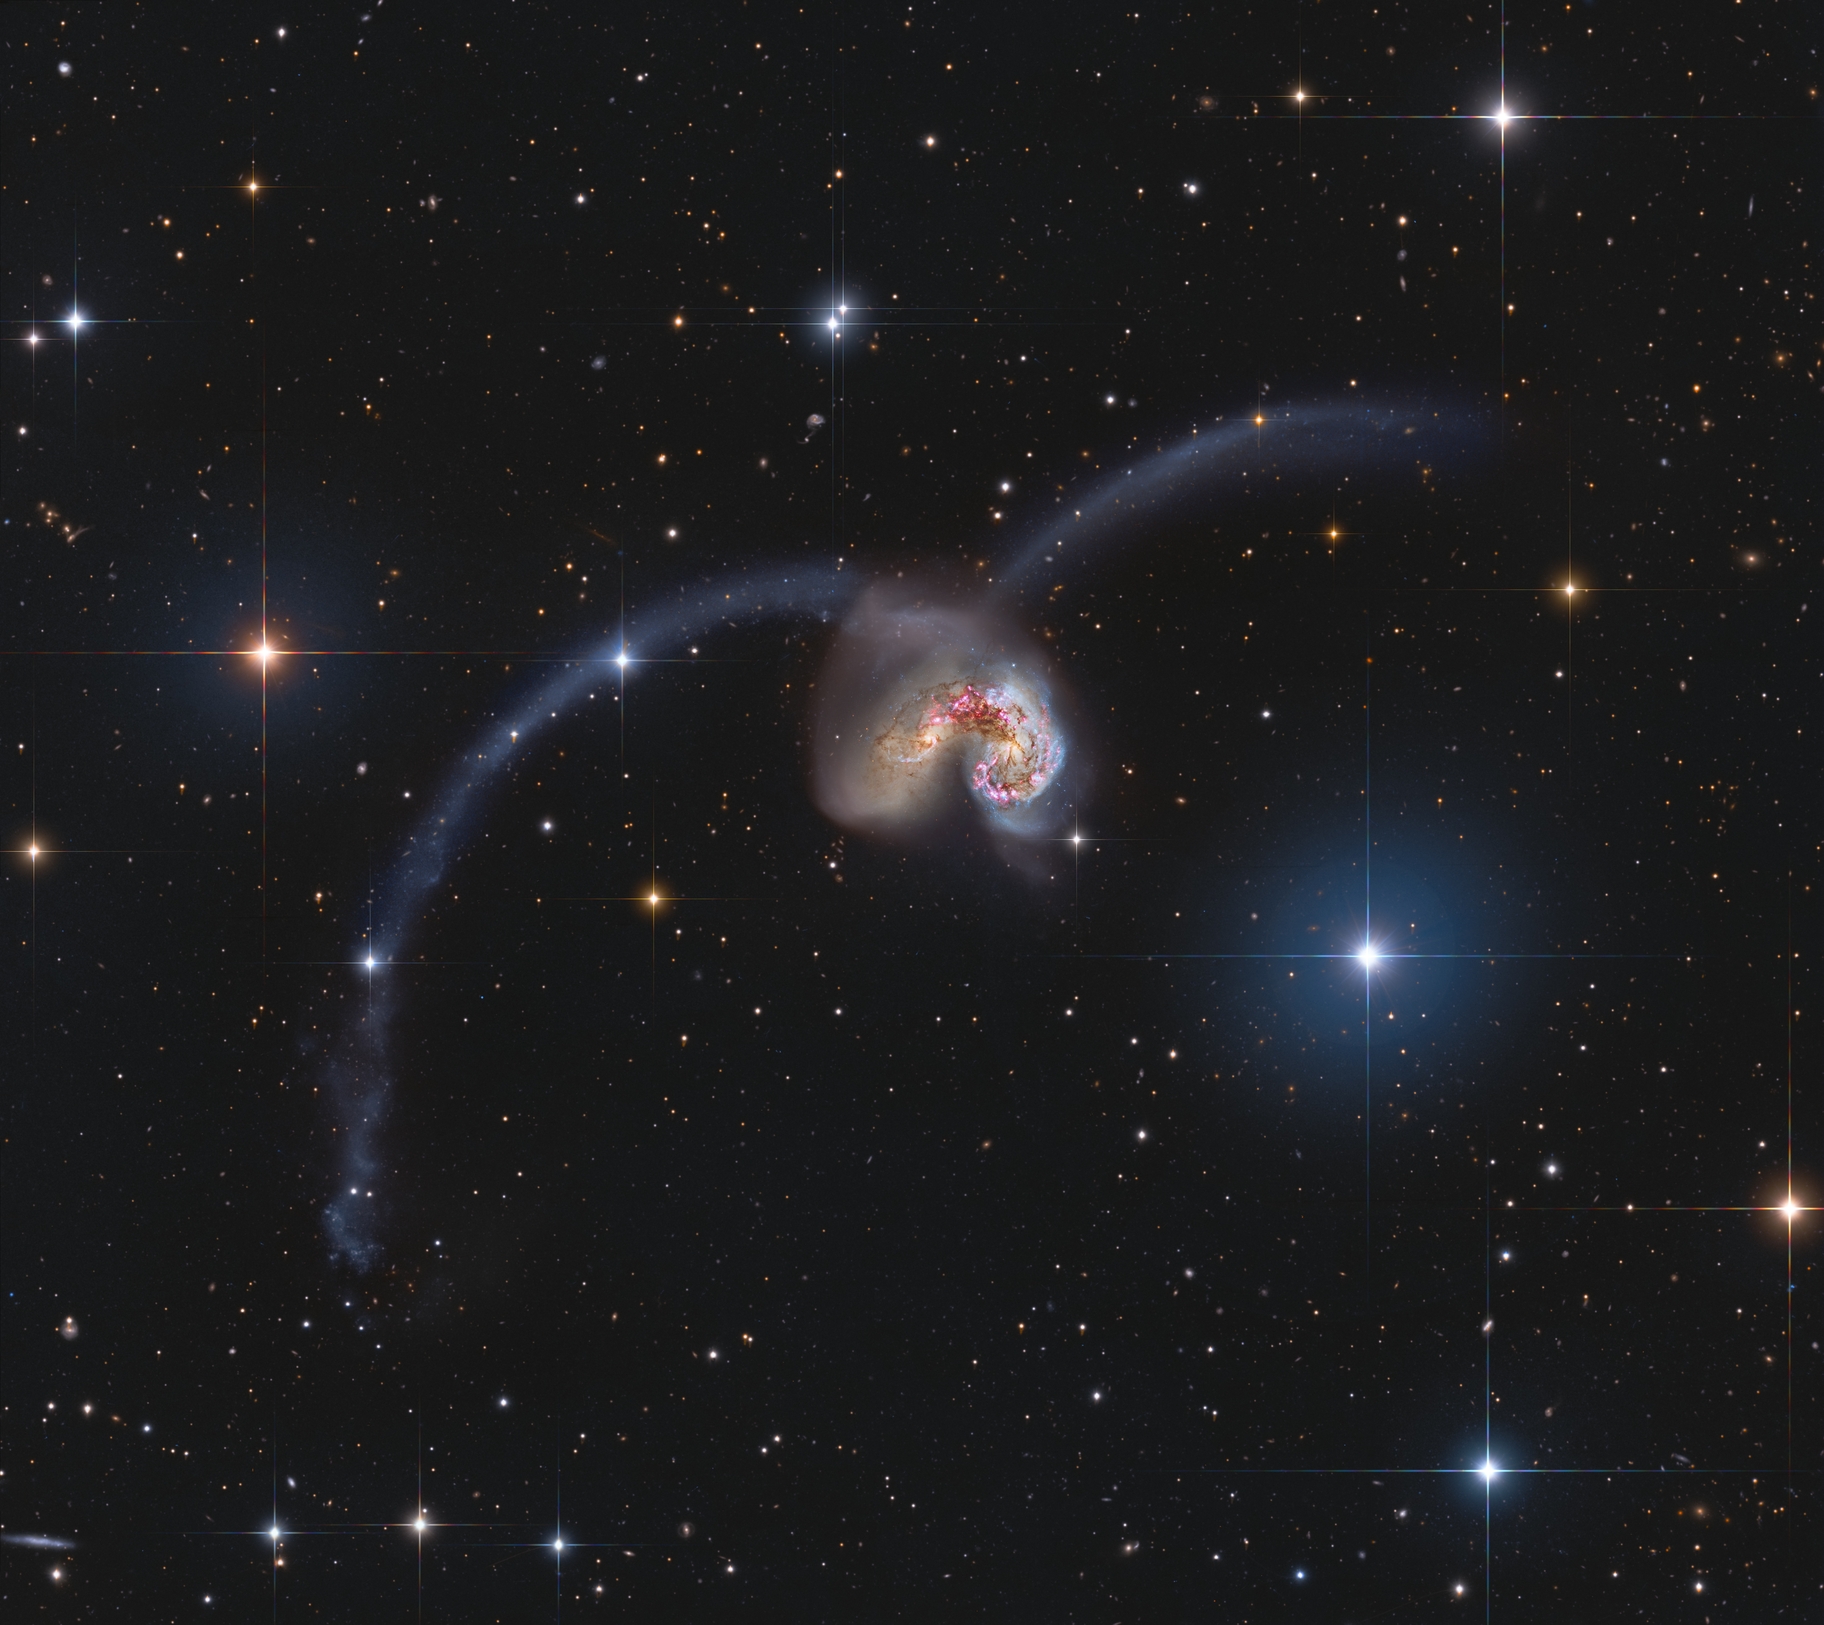 Astronomy Picture of the Day - Σελίδα 6 AntennaeColombari1824x0_q100_watermark